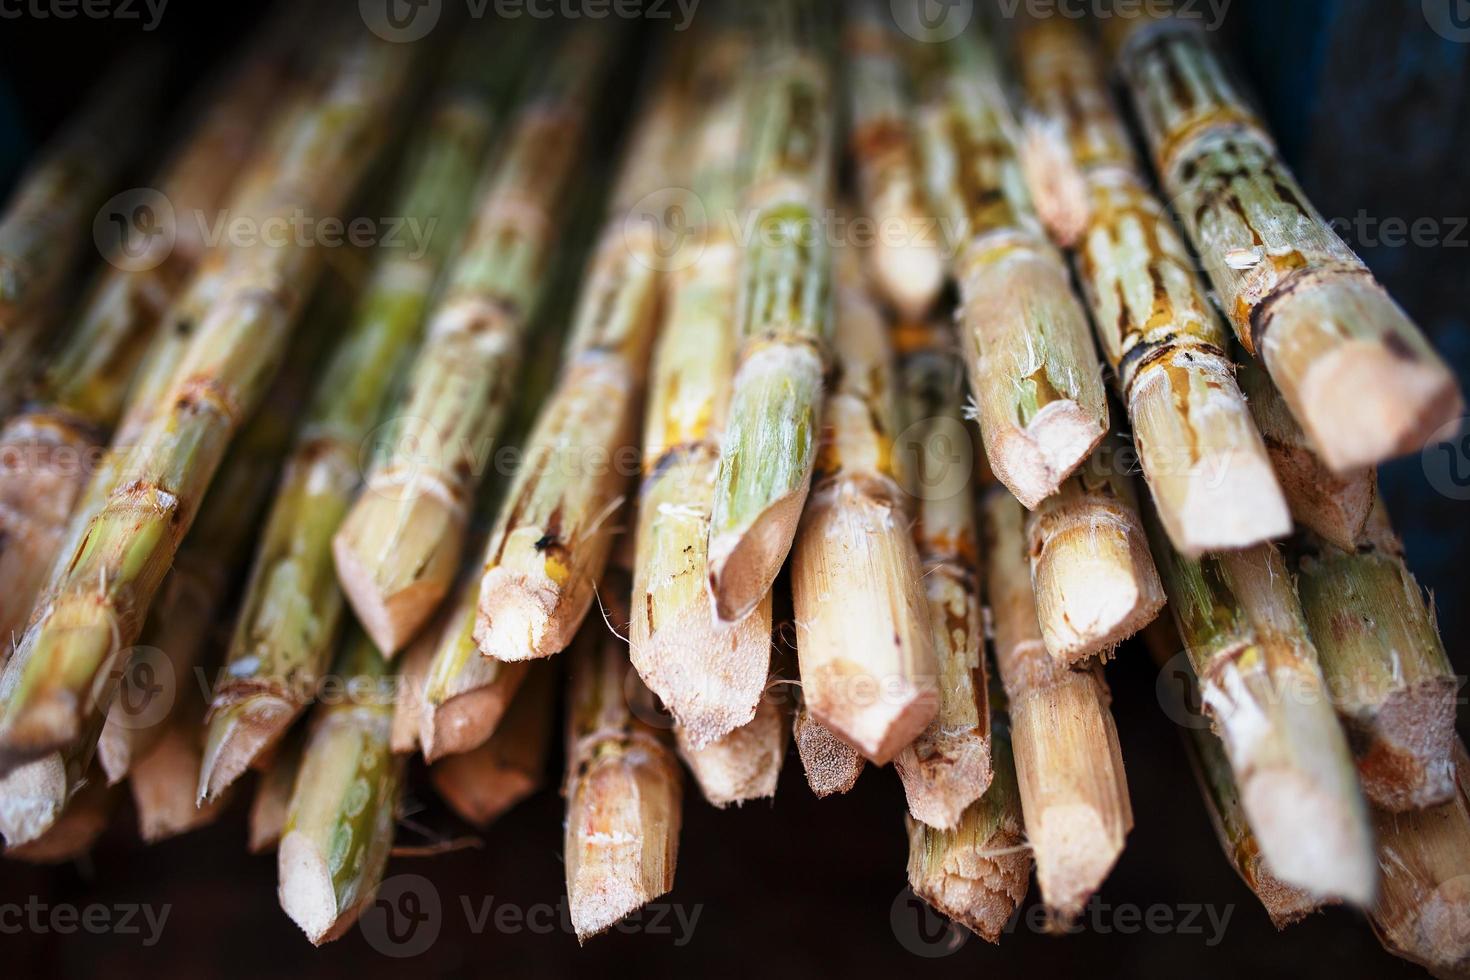 Sugar cane is a large pile before squeezing a sugar drink. Stack of branches close up photo